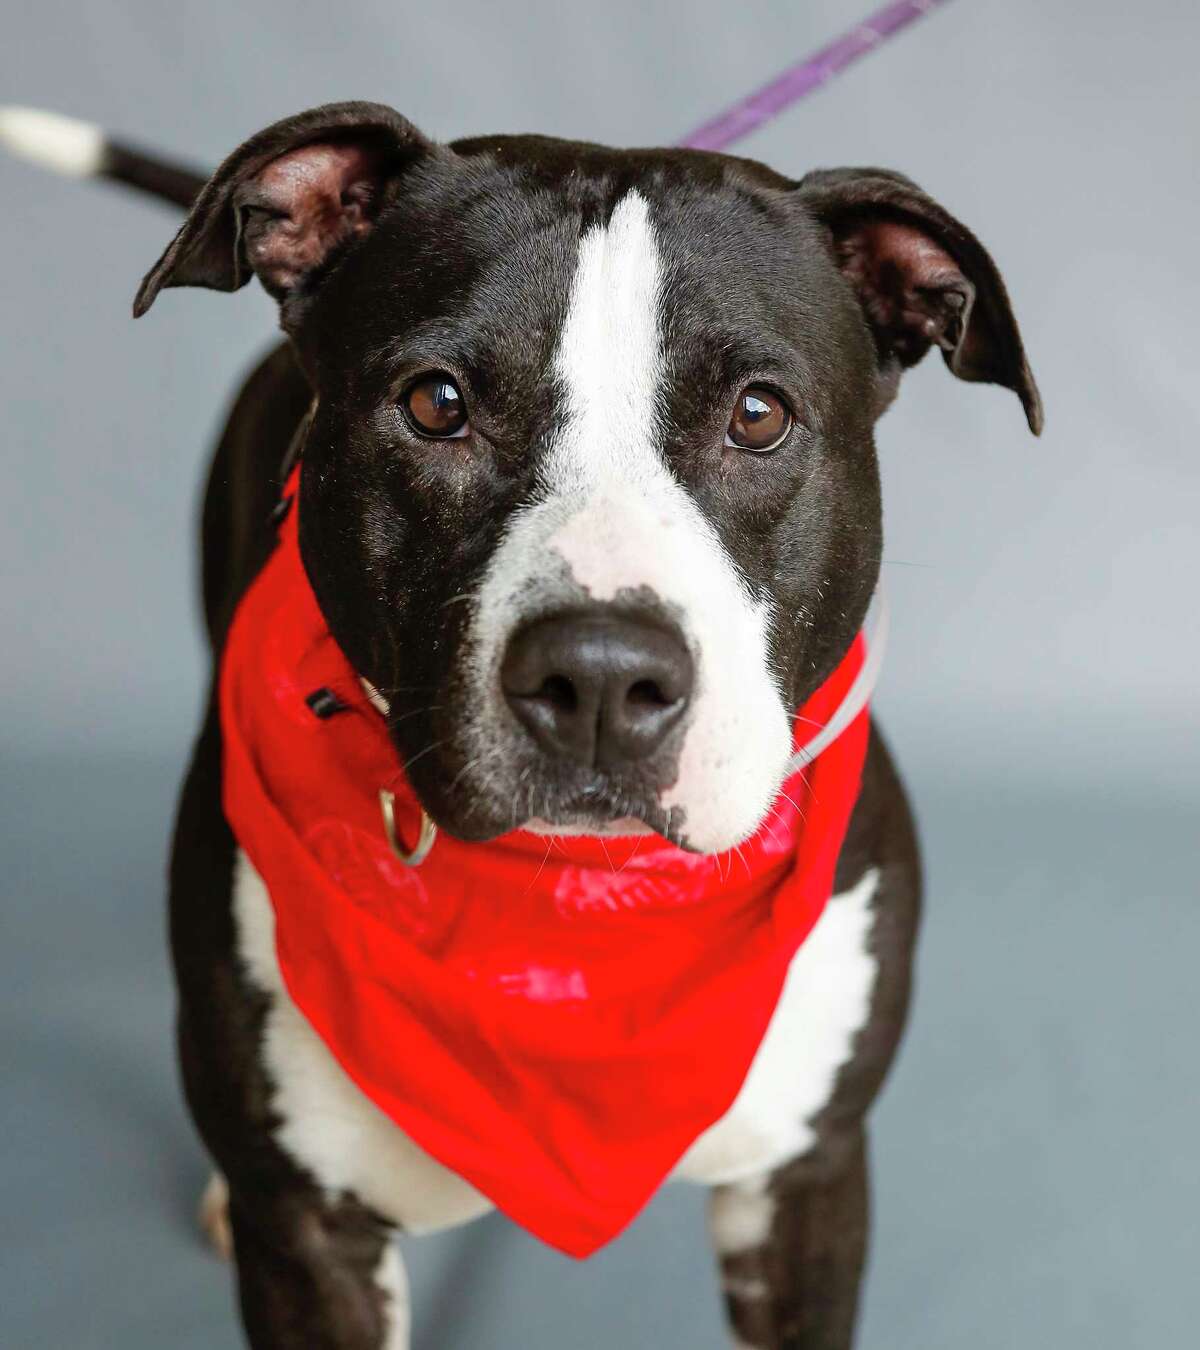 Re Peete (A1585913) is a 2-year-old, male, Staffordshire mix who is another staff favorite at BARC. He was rescued along with 21 other dogs that were found living at a single home that officials describe as a hoarding situation. According to shelter officials, he loves playing with dogs of all sizes and "has this adorable skipping-hop when he runs!"